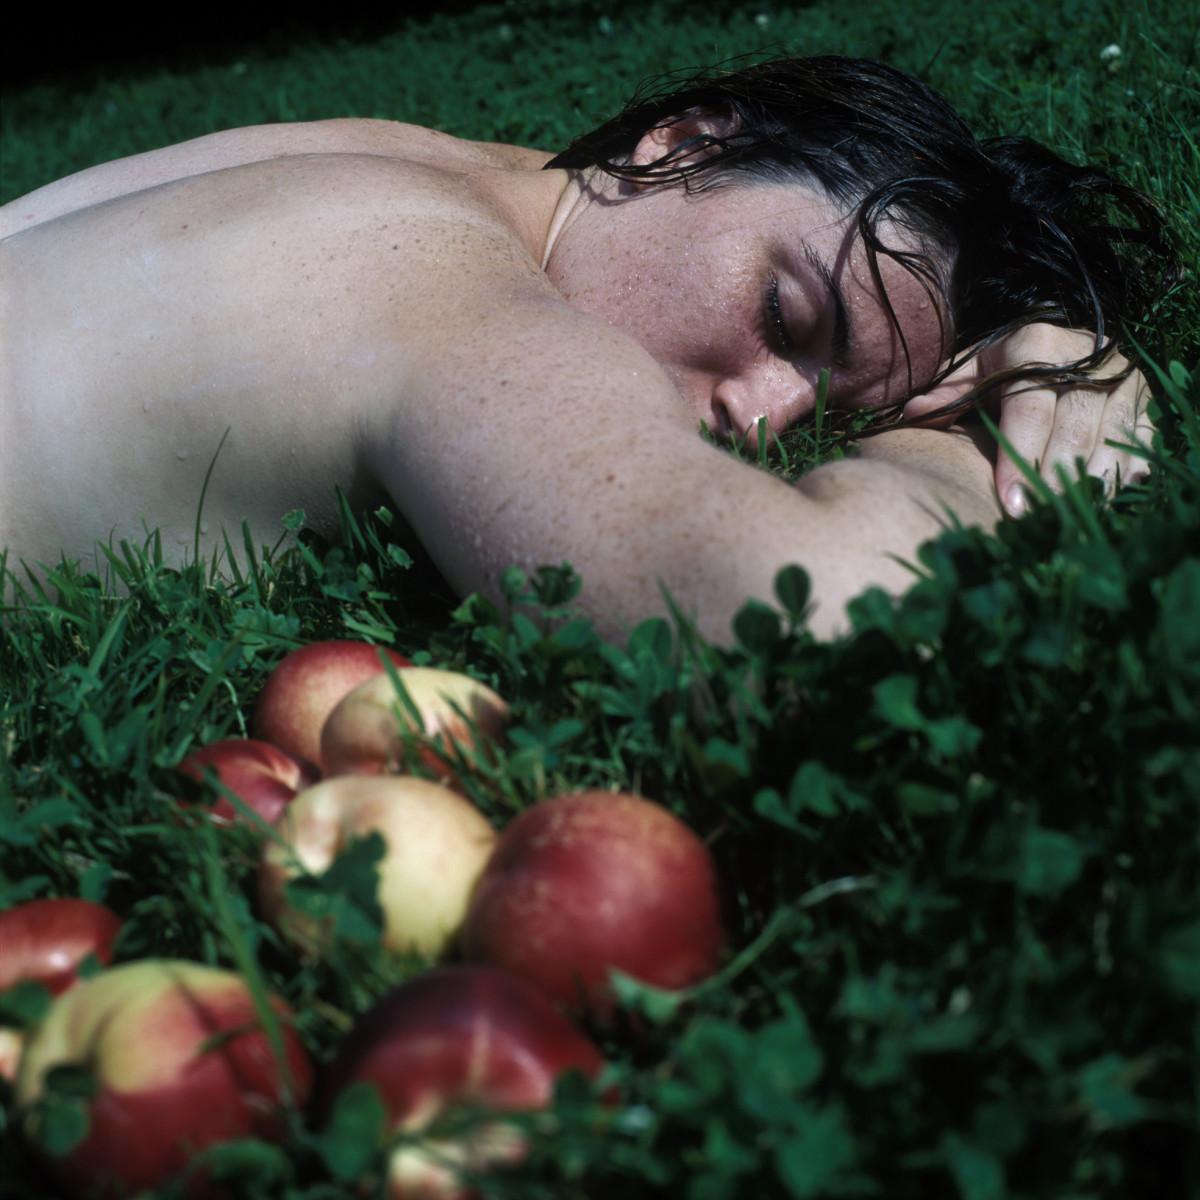 Luncheon on the Grass series, 2003. Jean Claude Bélégou, Acquired 2004.